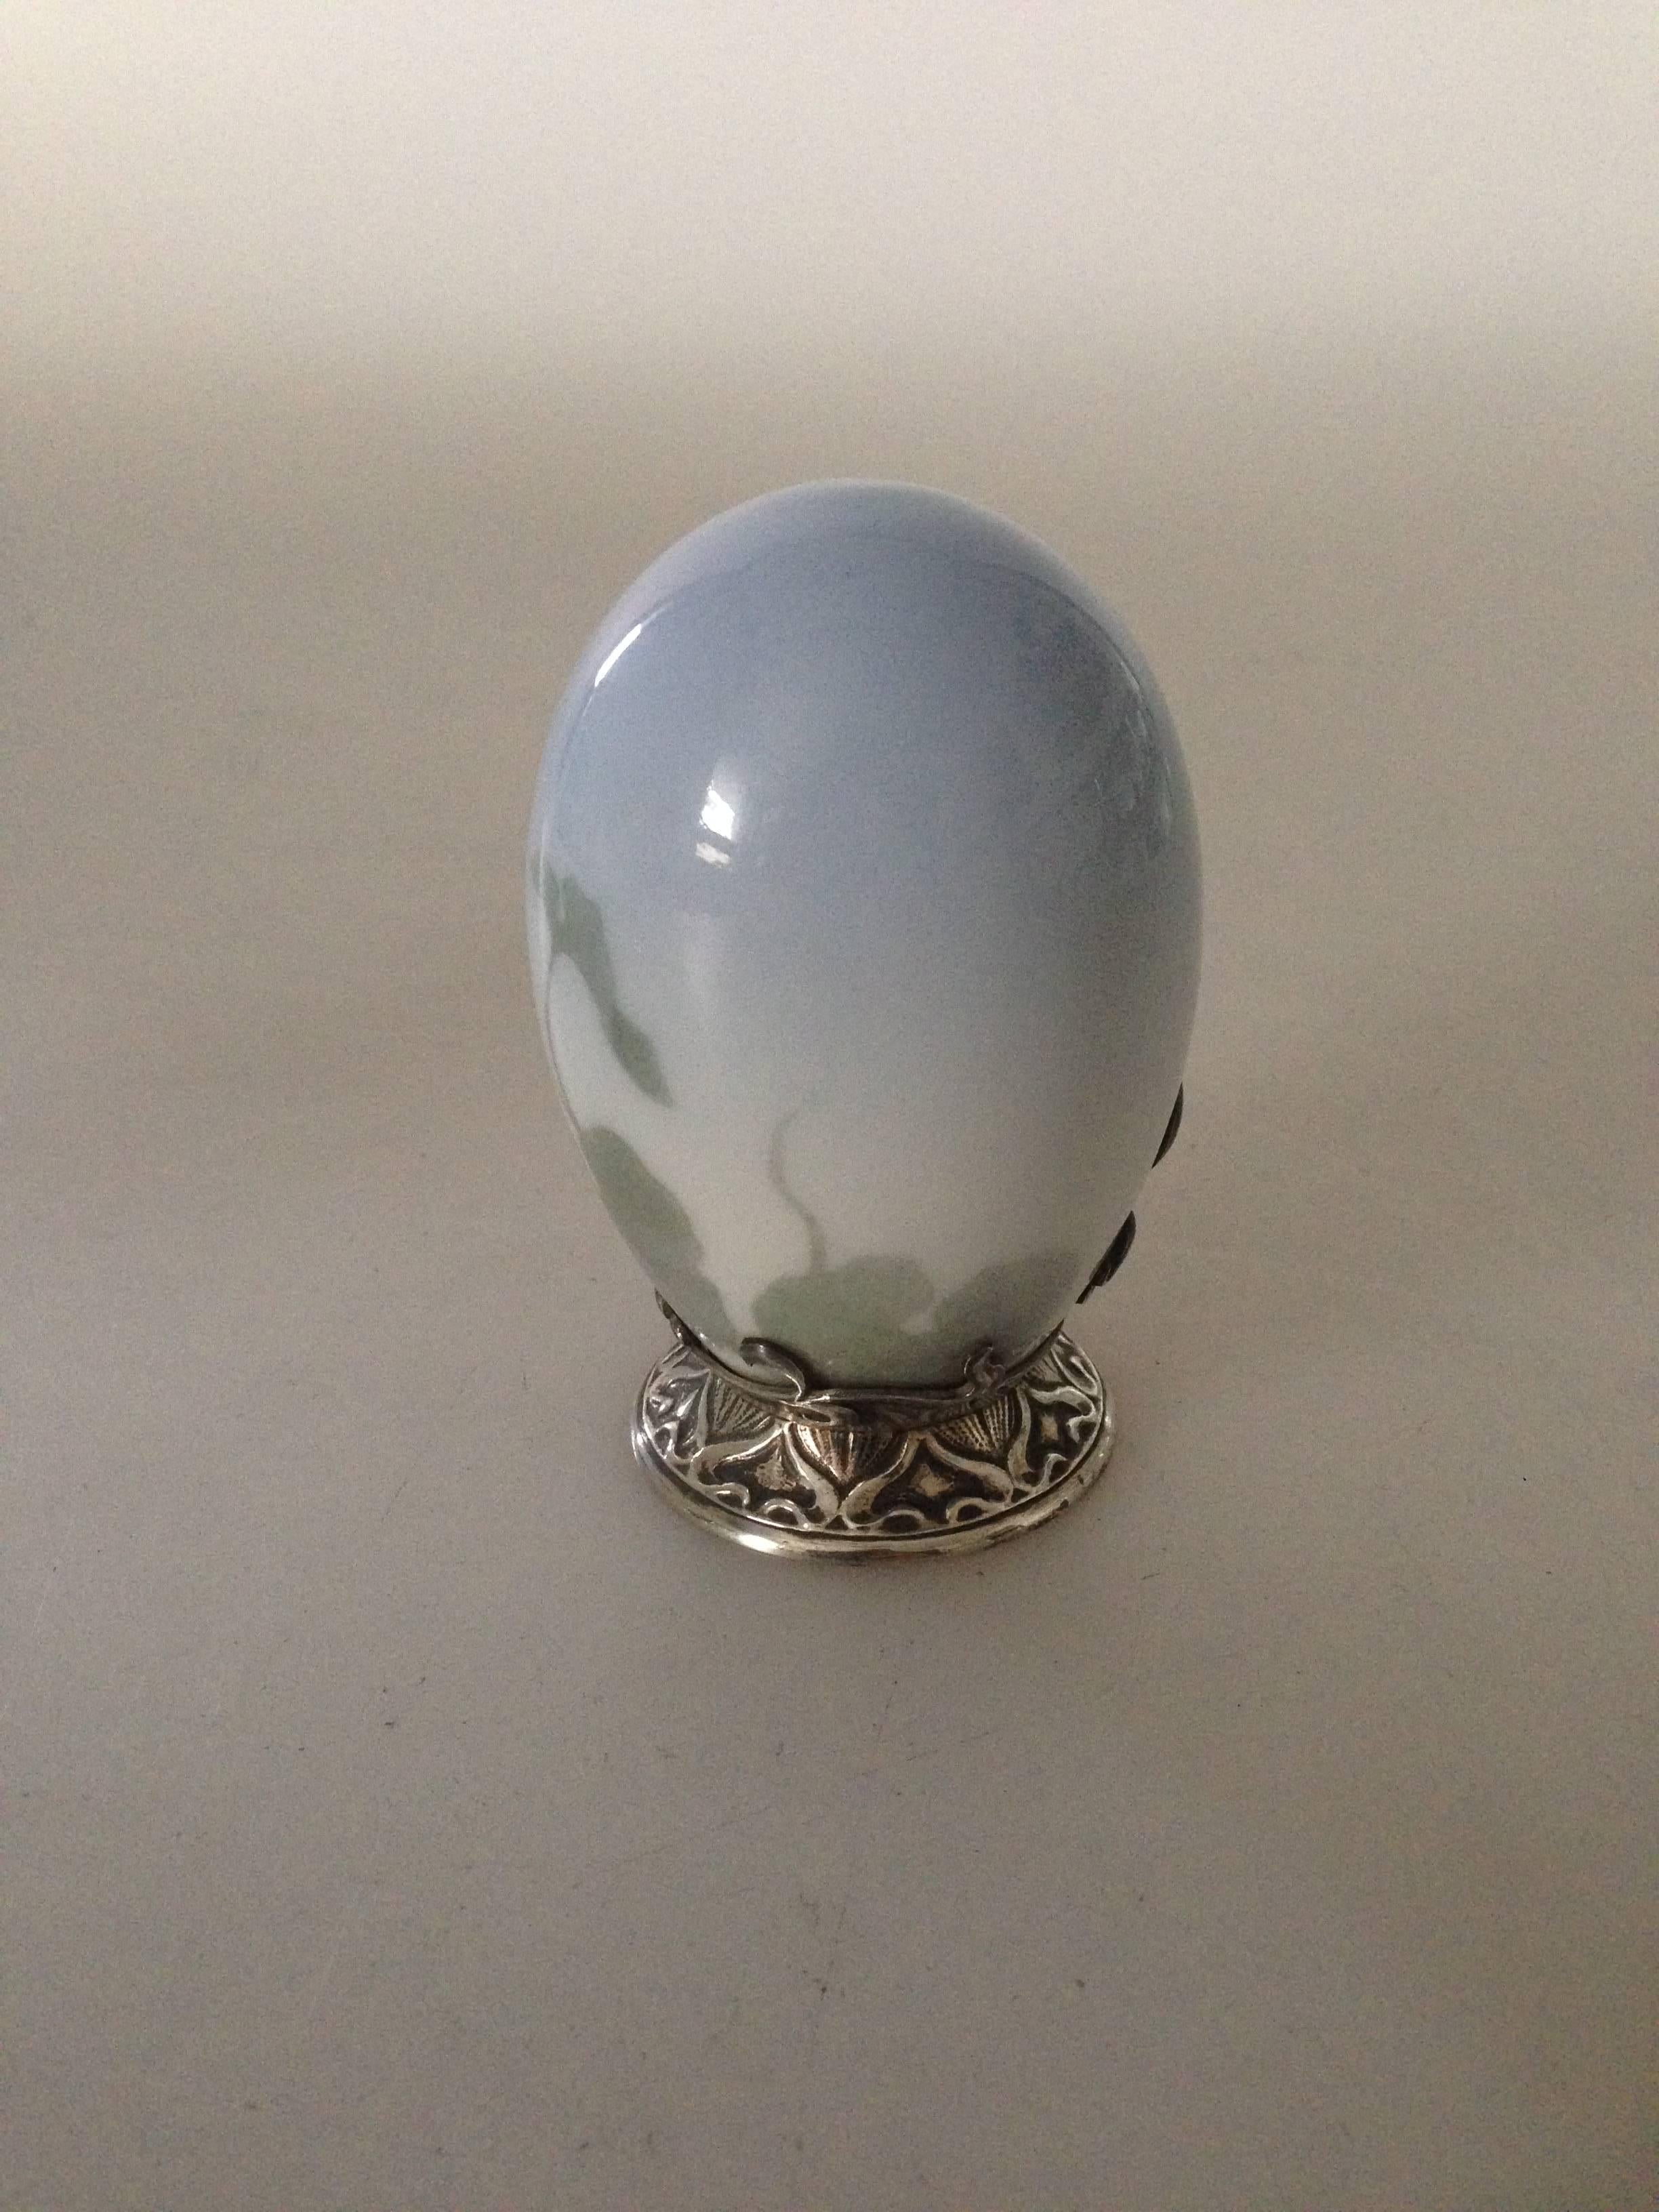 Royal Copenhagen Art Nouveau egg with Anton Michelsen silver mounting from 1902. This is pure luxury. Also see the other egg we have for sale.